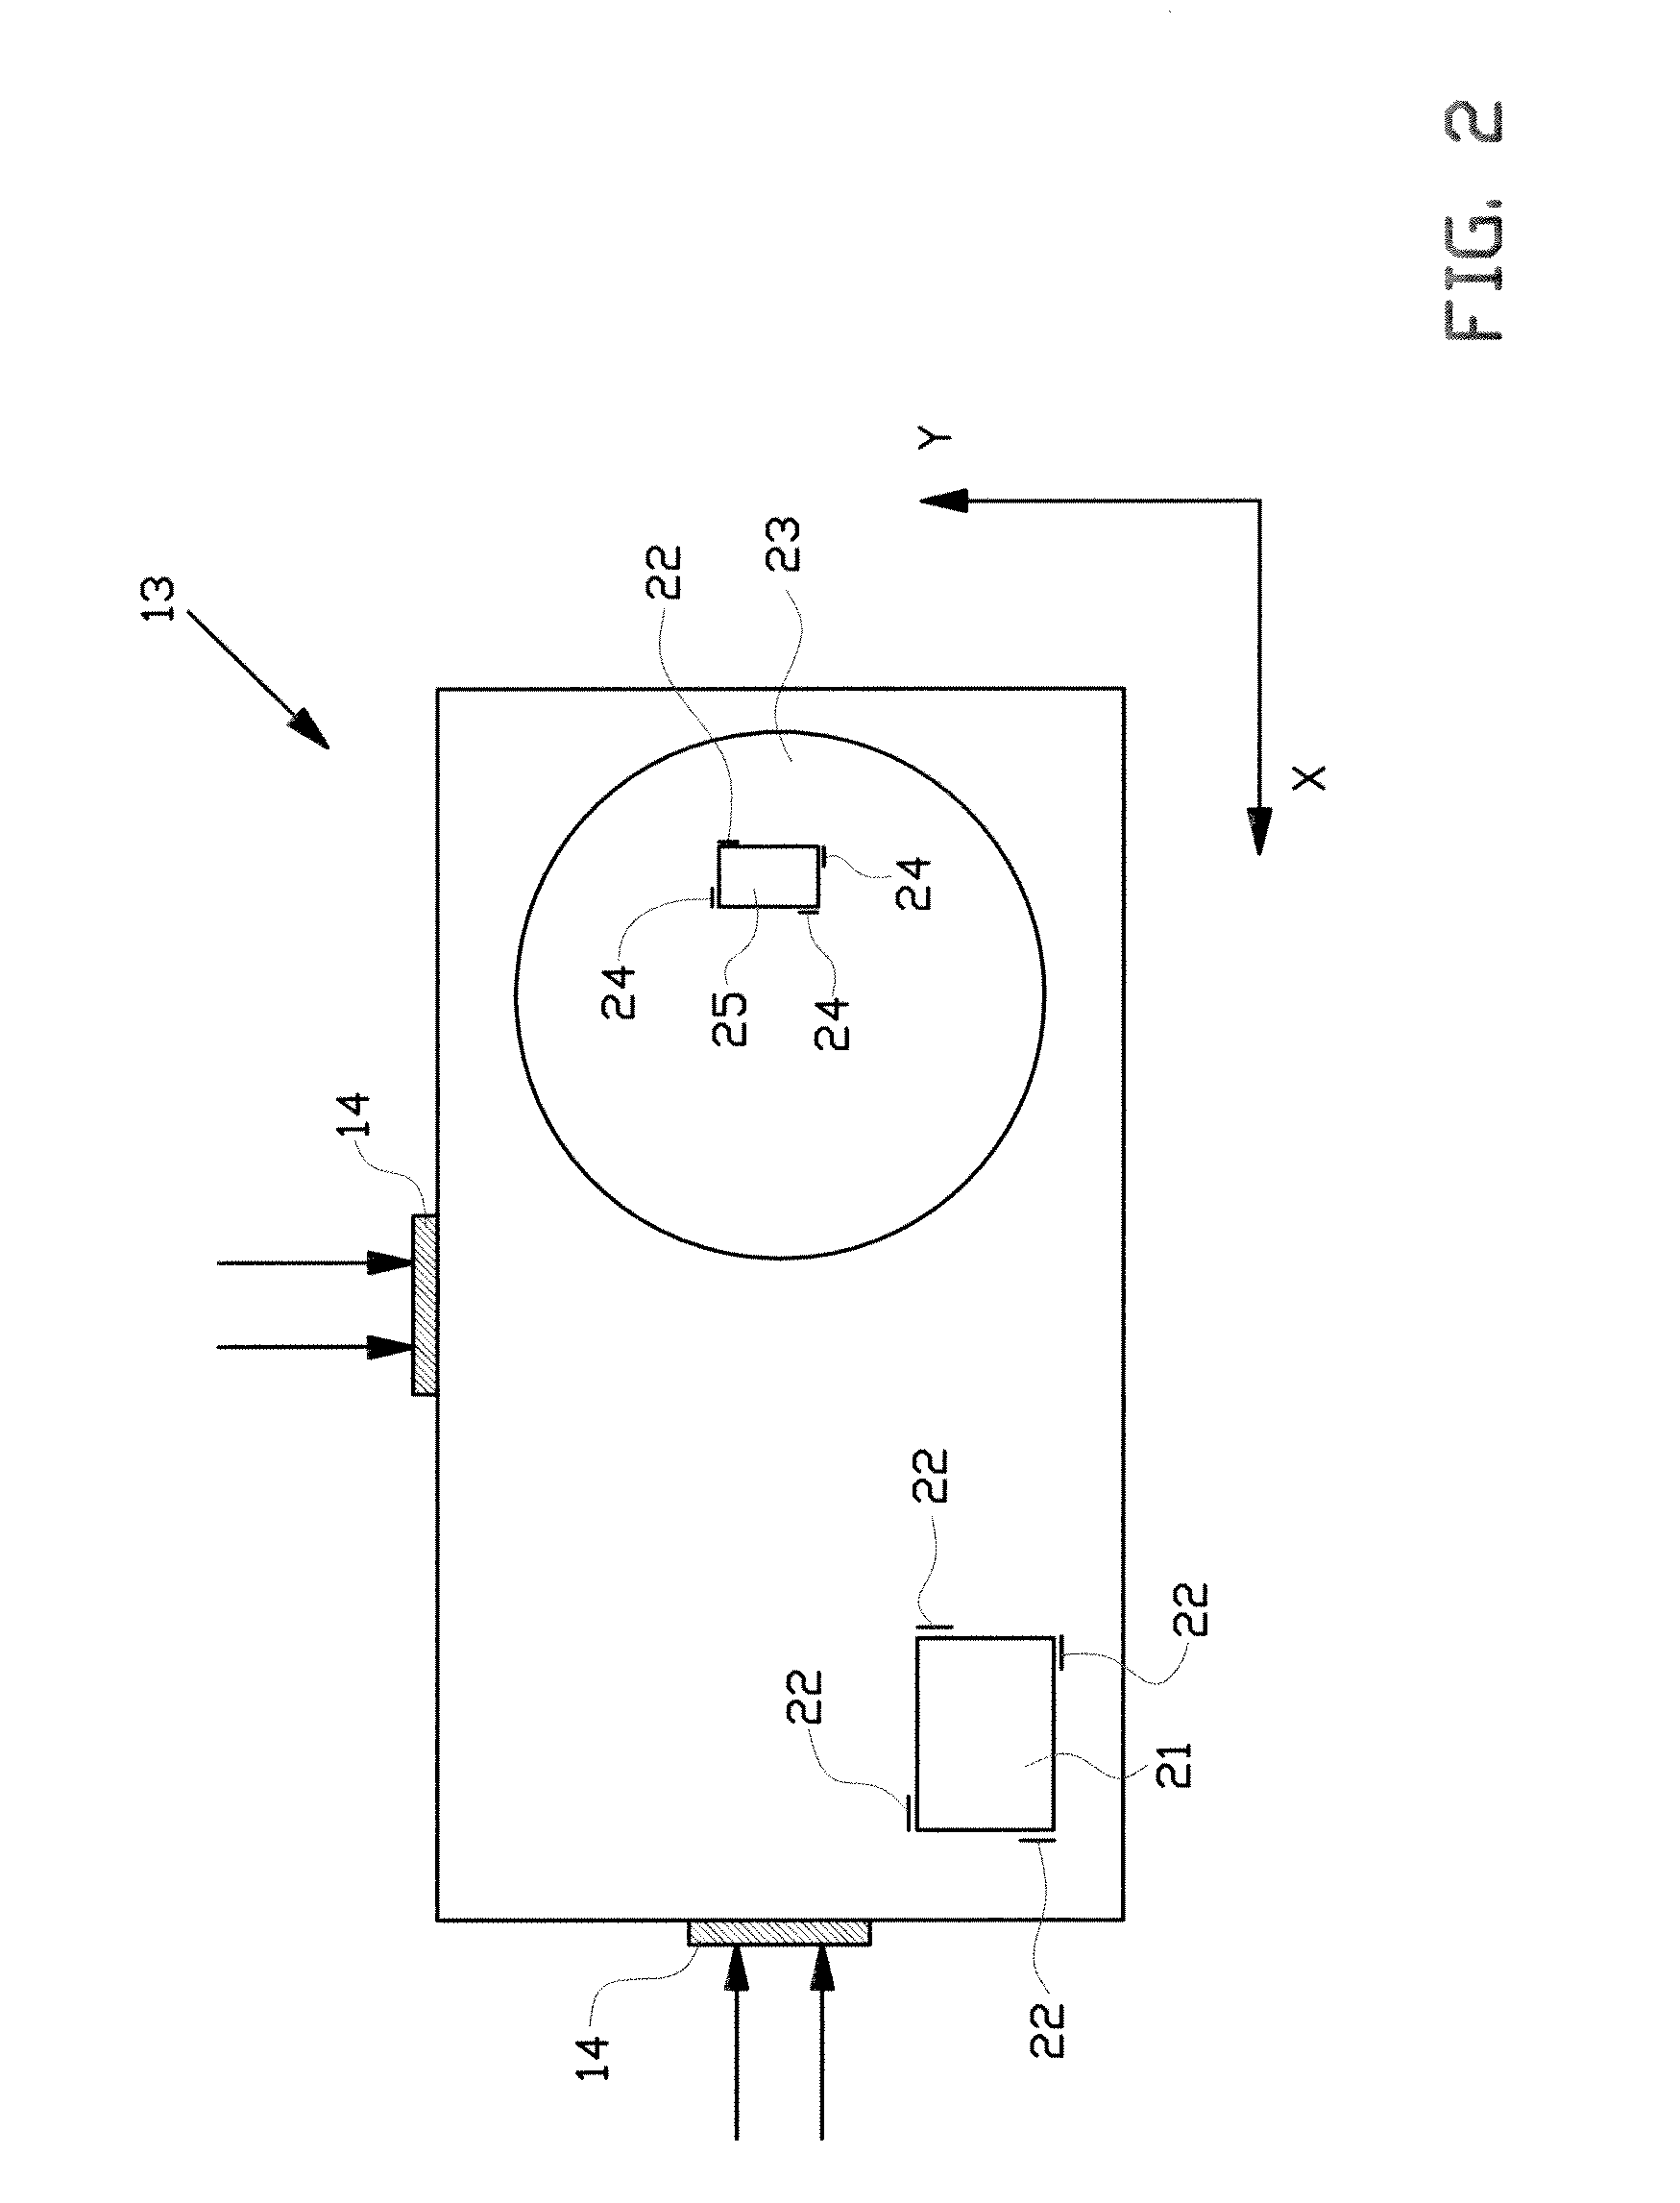 Lithography system for processing a target, such as a wafer, a method for operating a lithography system for processing a target, such as a wafer and a substrate for use in such a lithography system